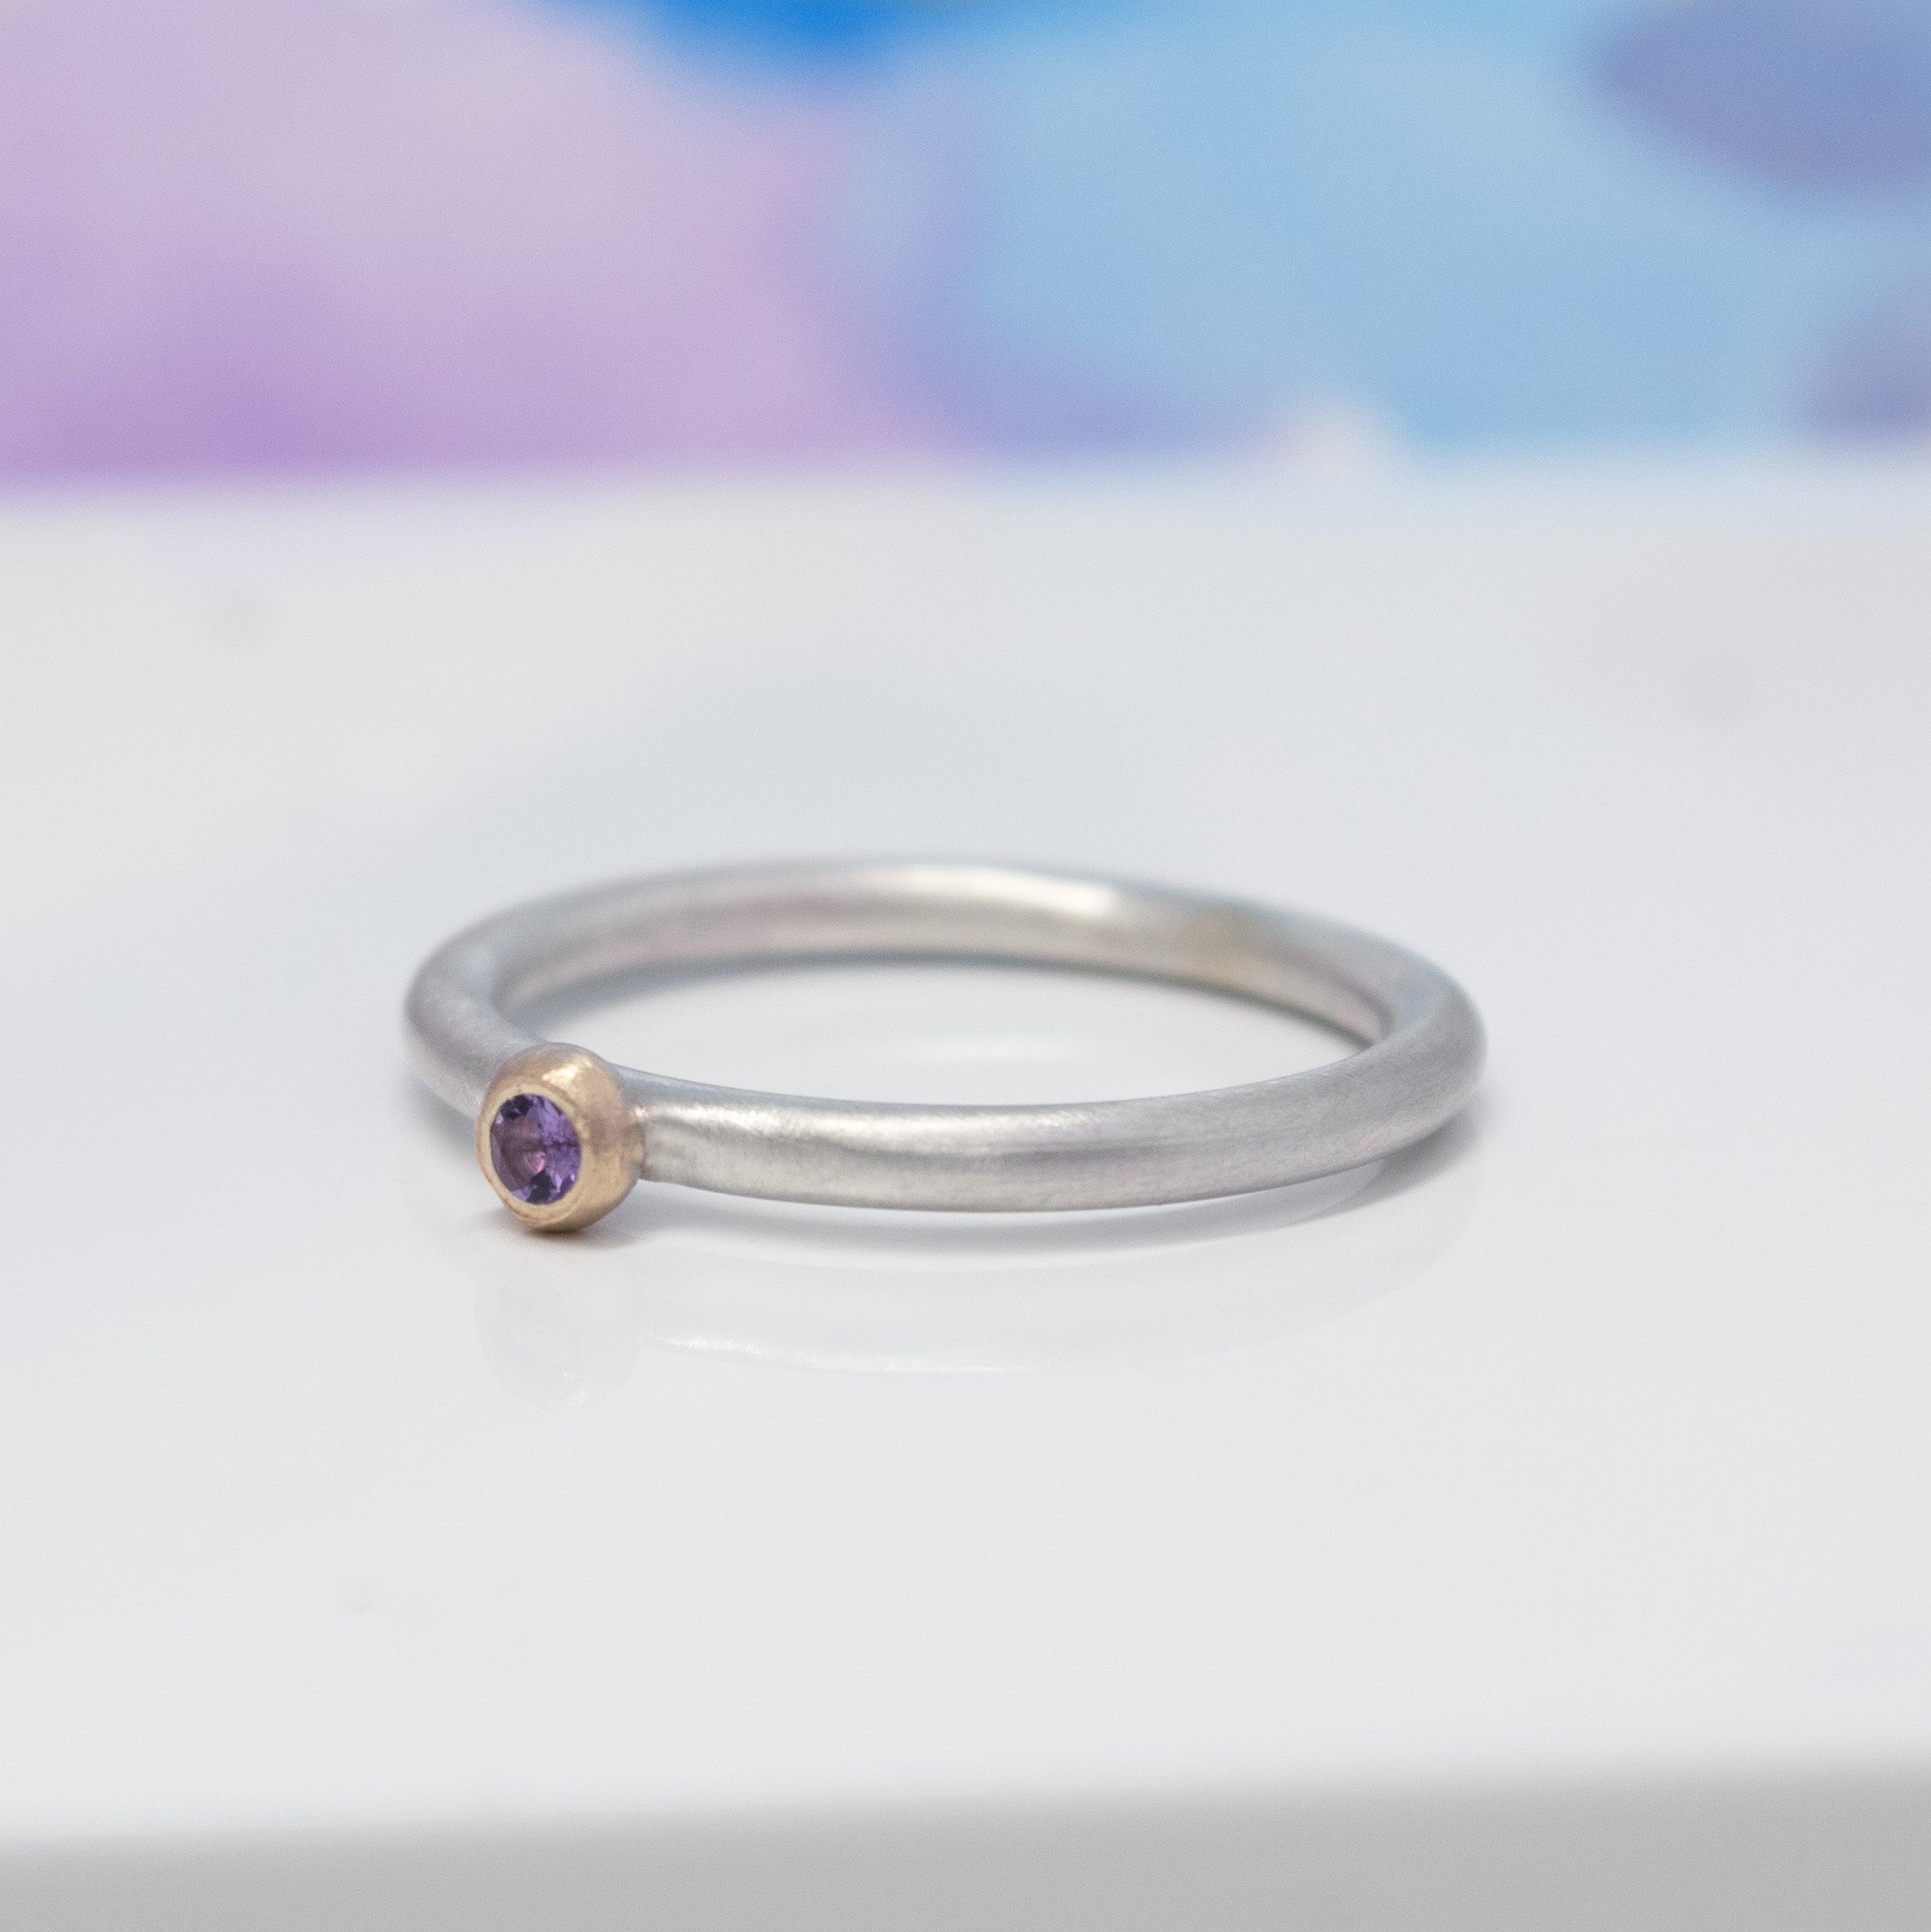 Silver Stacking Rings with 9ct Gold Dot and Gemstone